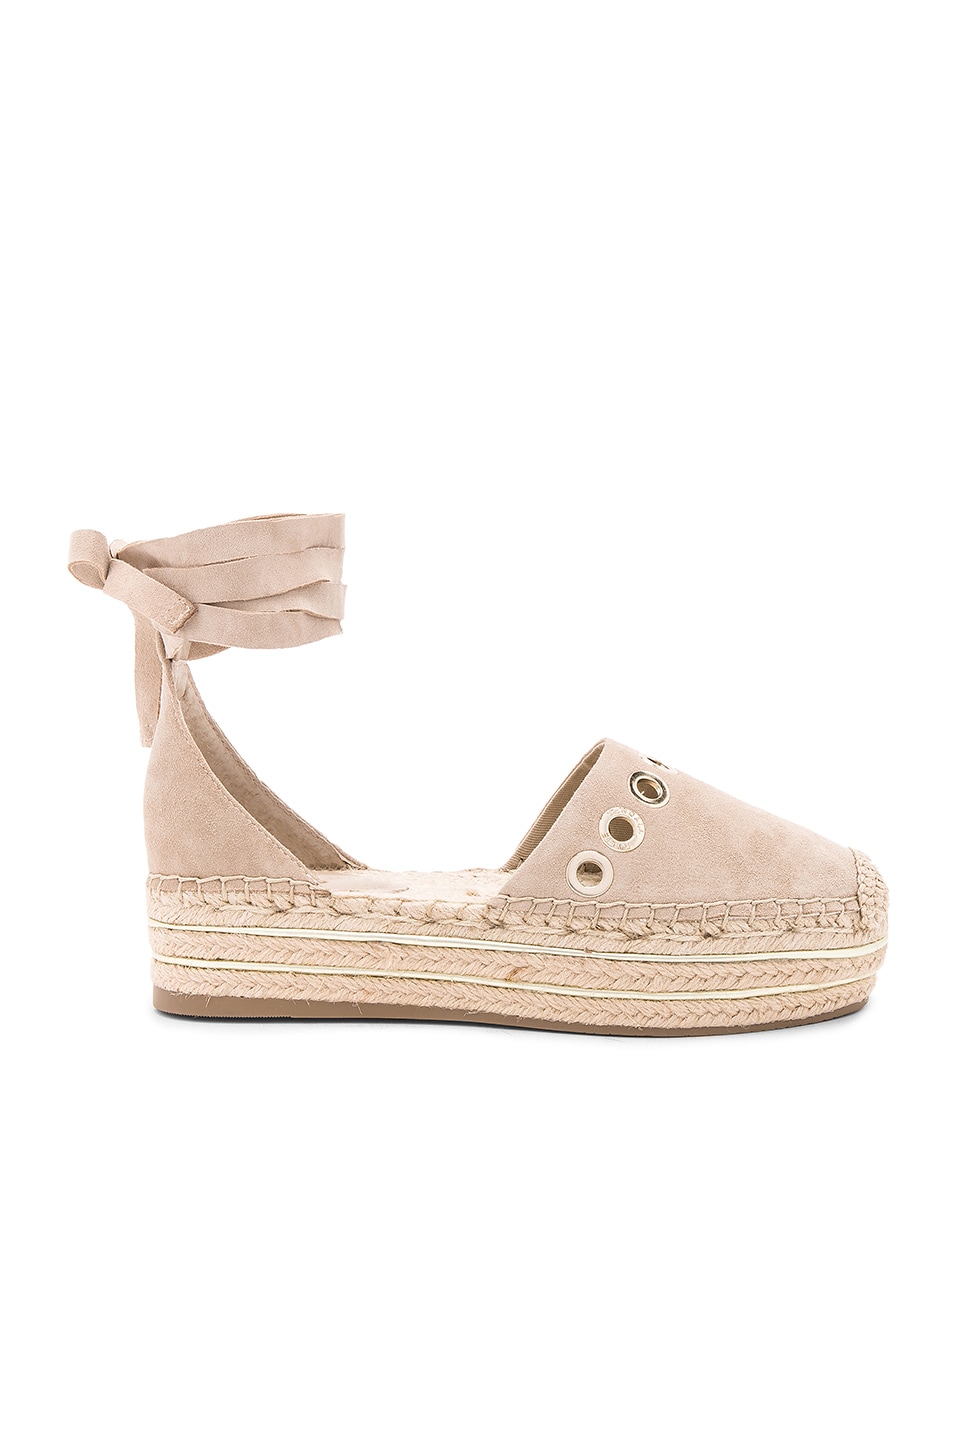 kendall and kylie espadrille sneakers